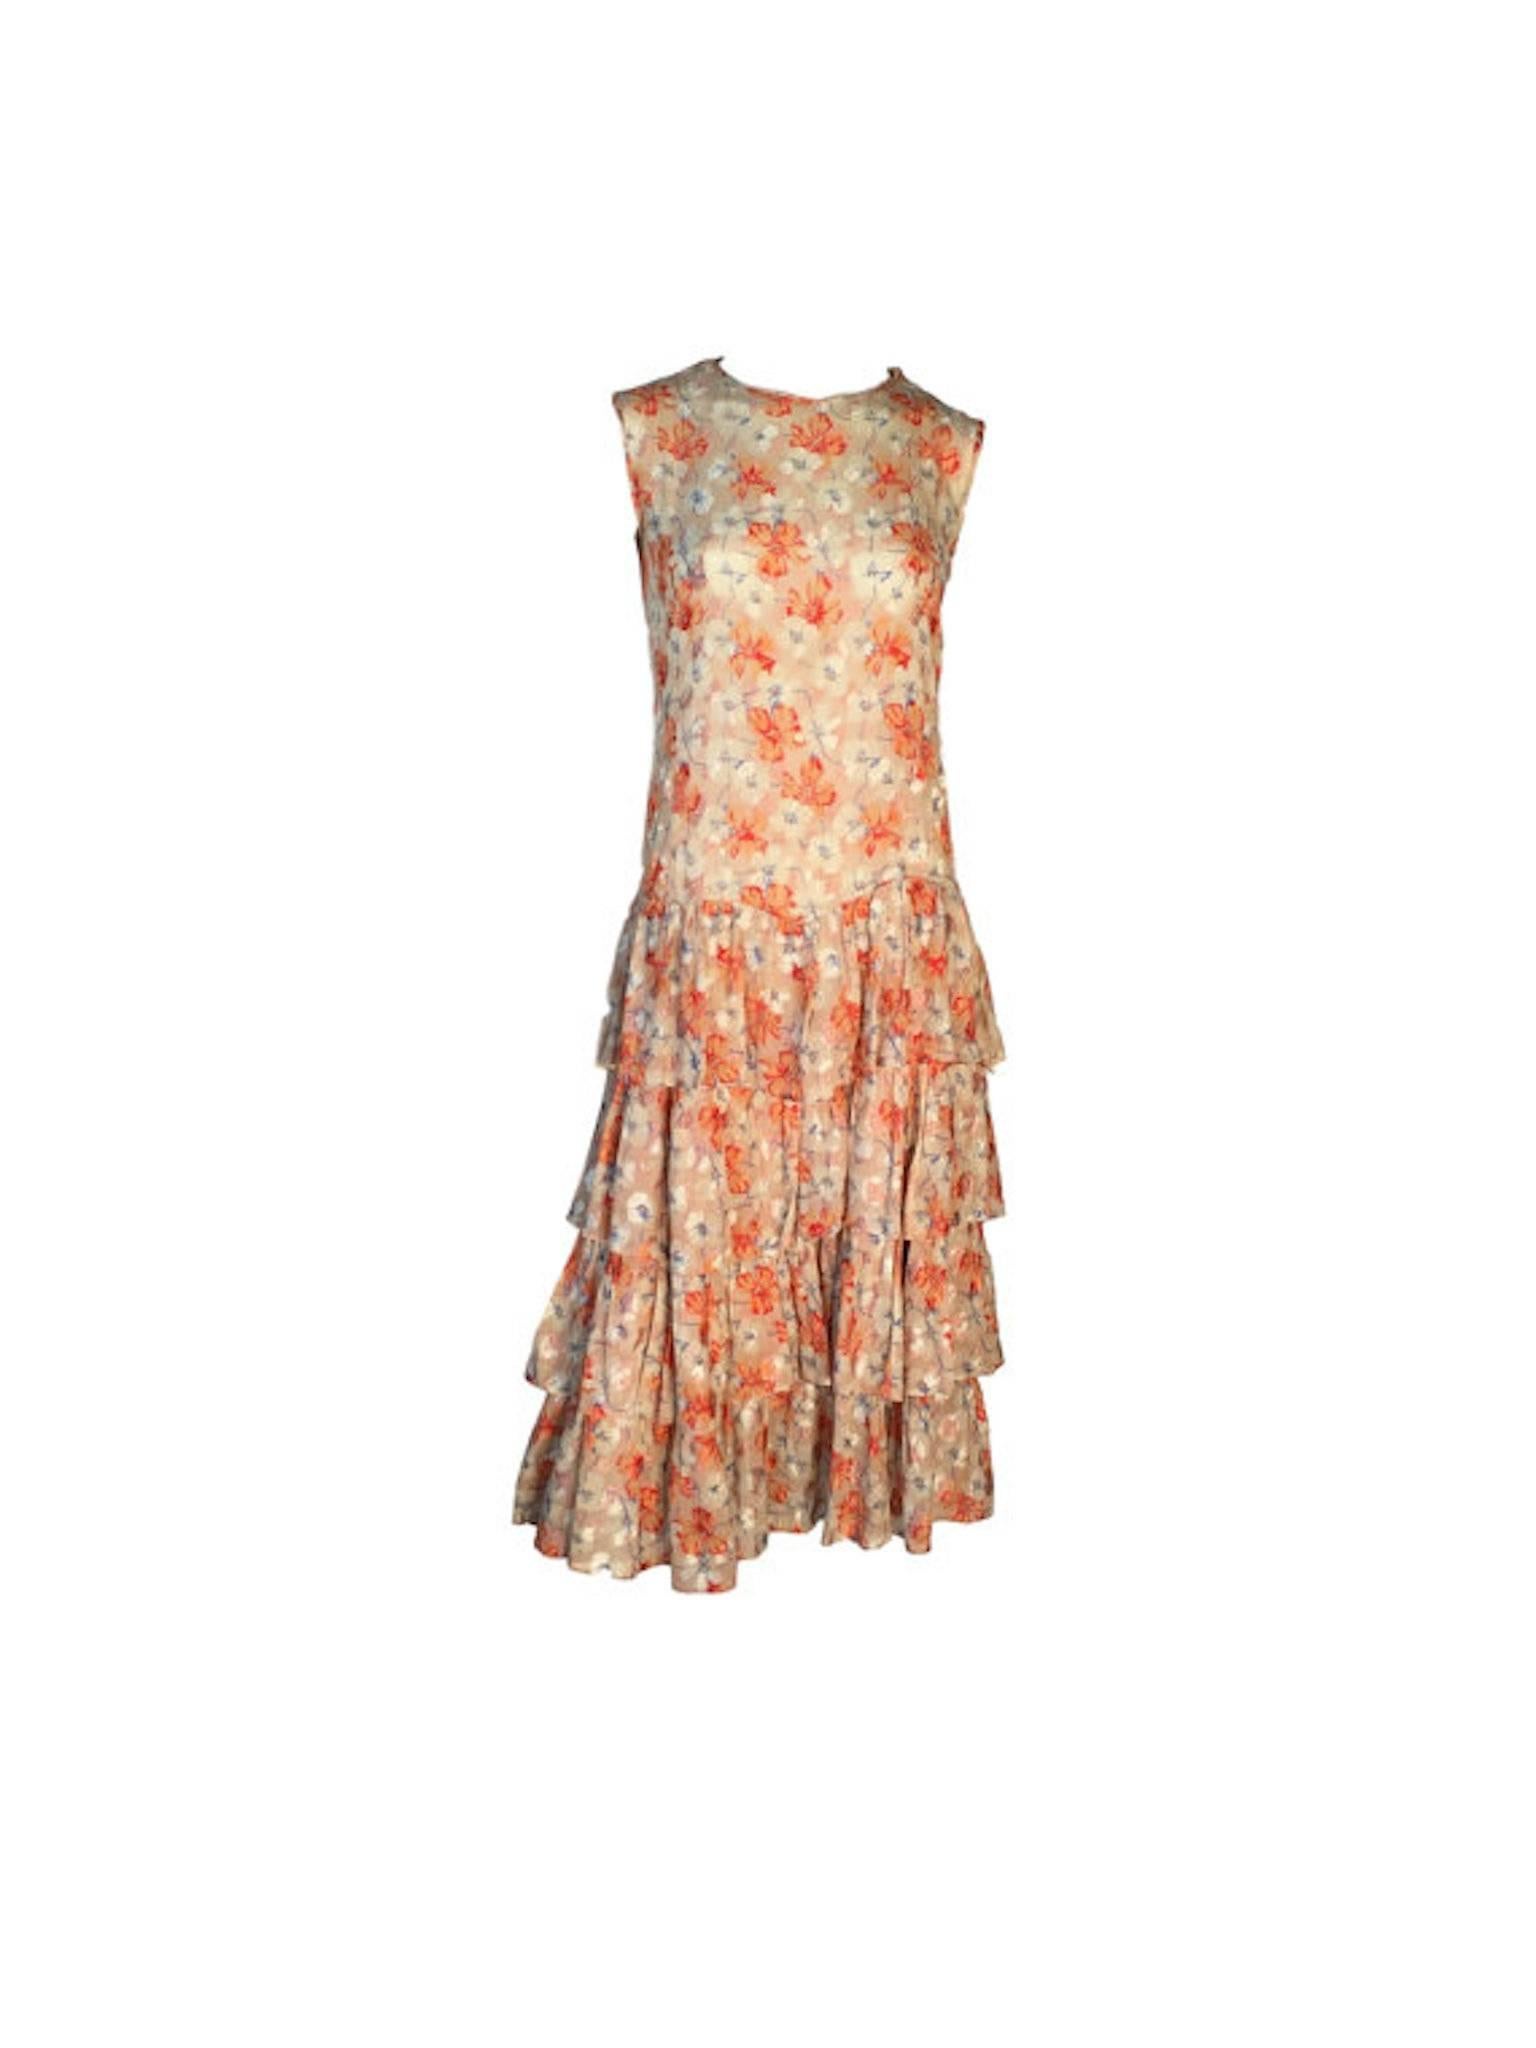 So pretty and feminine 1930s fine cotton floral printed and embroidered dress. With tiered dropped waist, has relaxed fit and shoulder popper entry.

Size UK 8. Measuring 16 inches across bust and 48 inches length

In excellent wearable